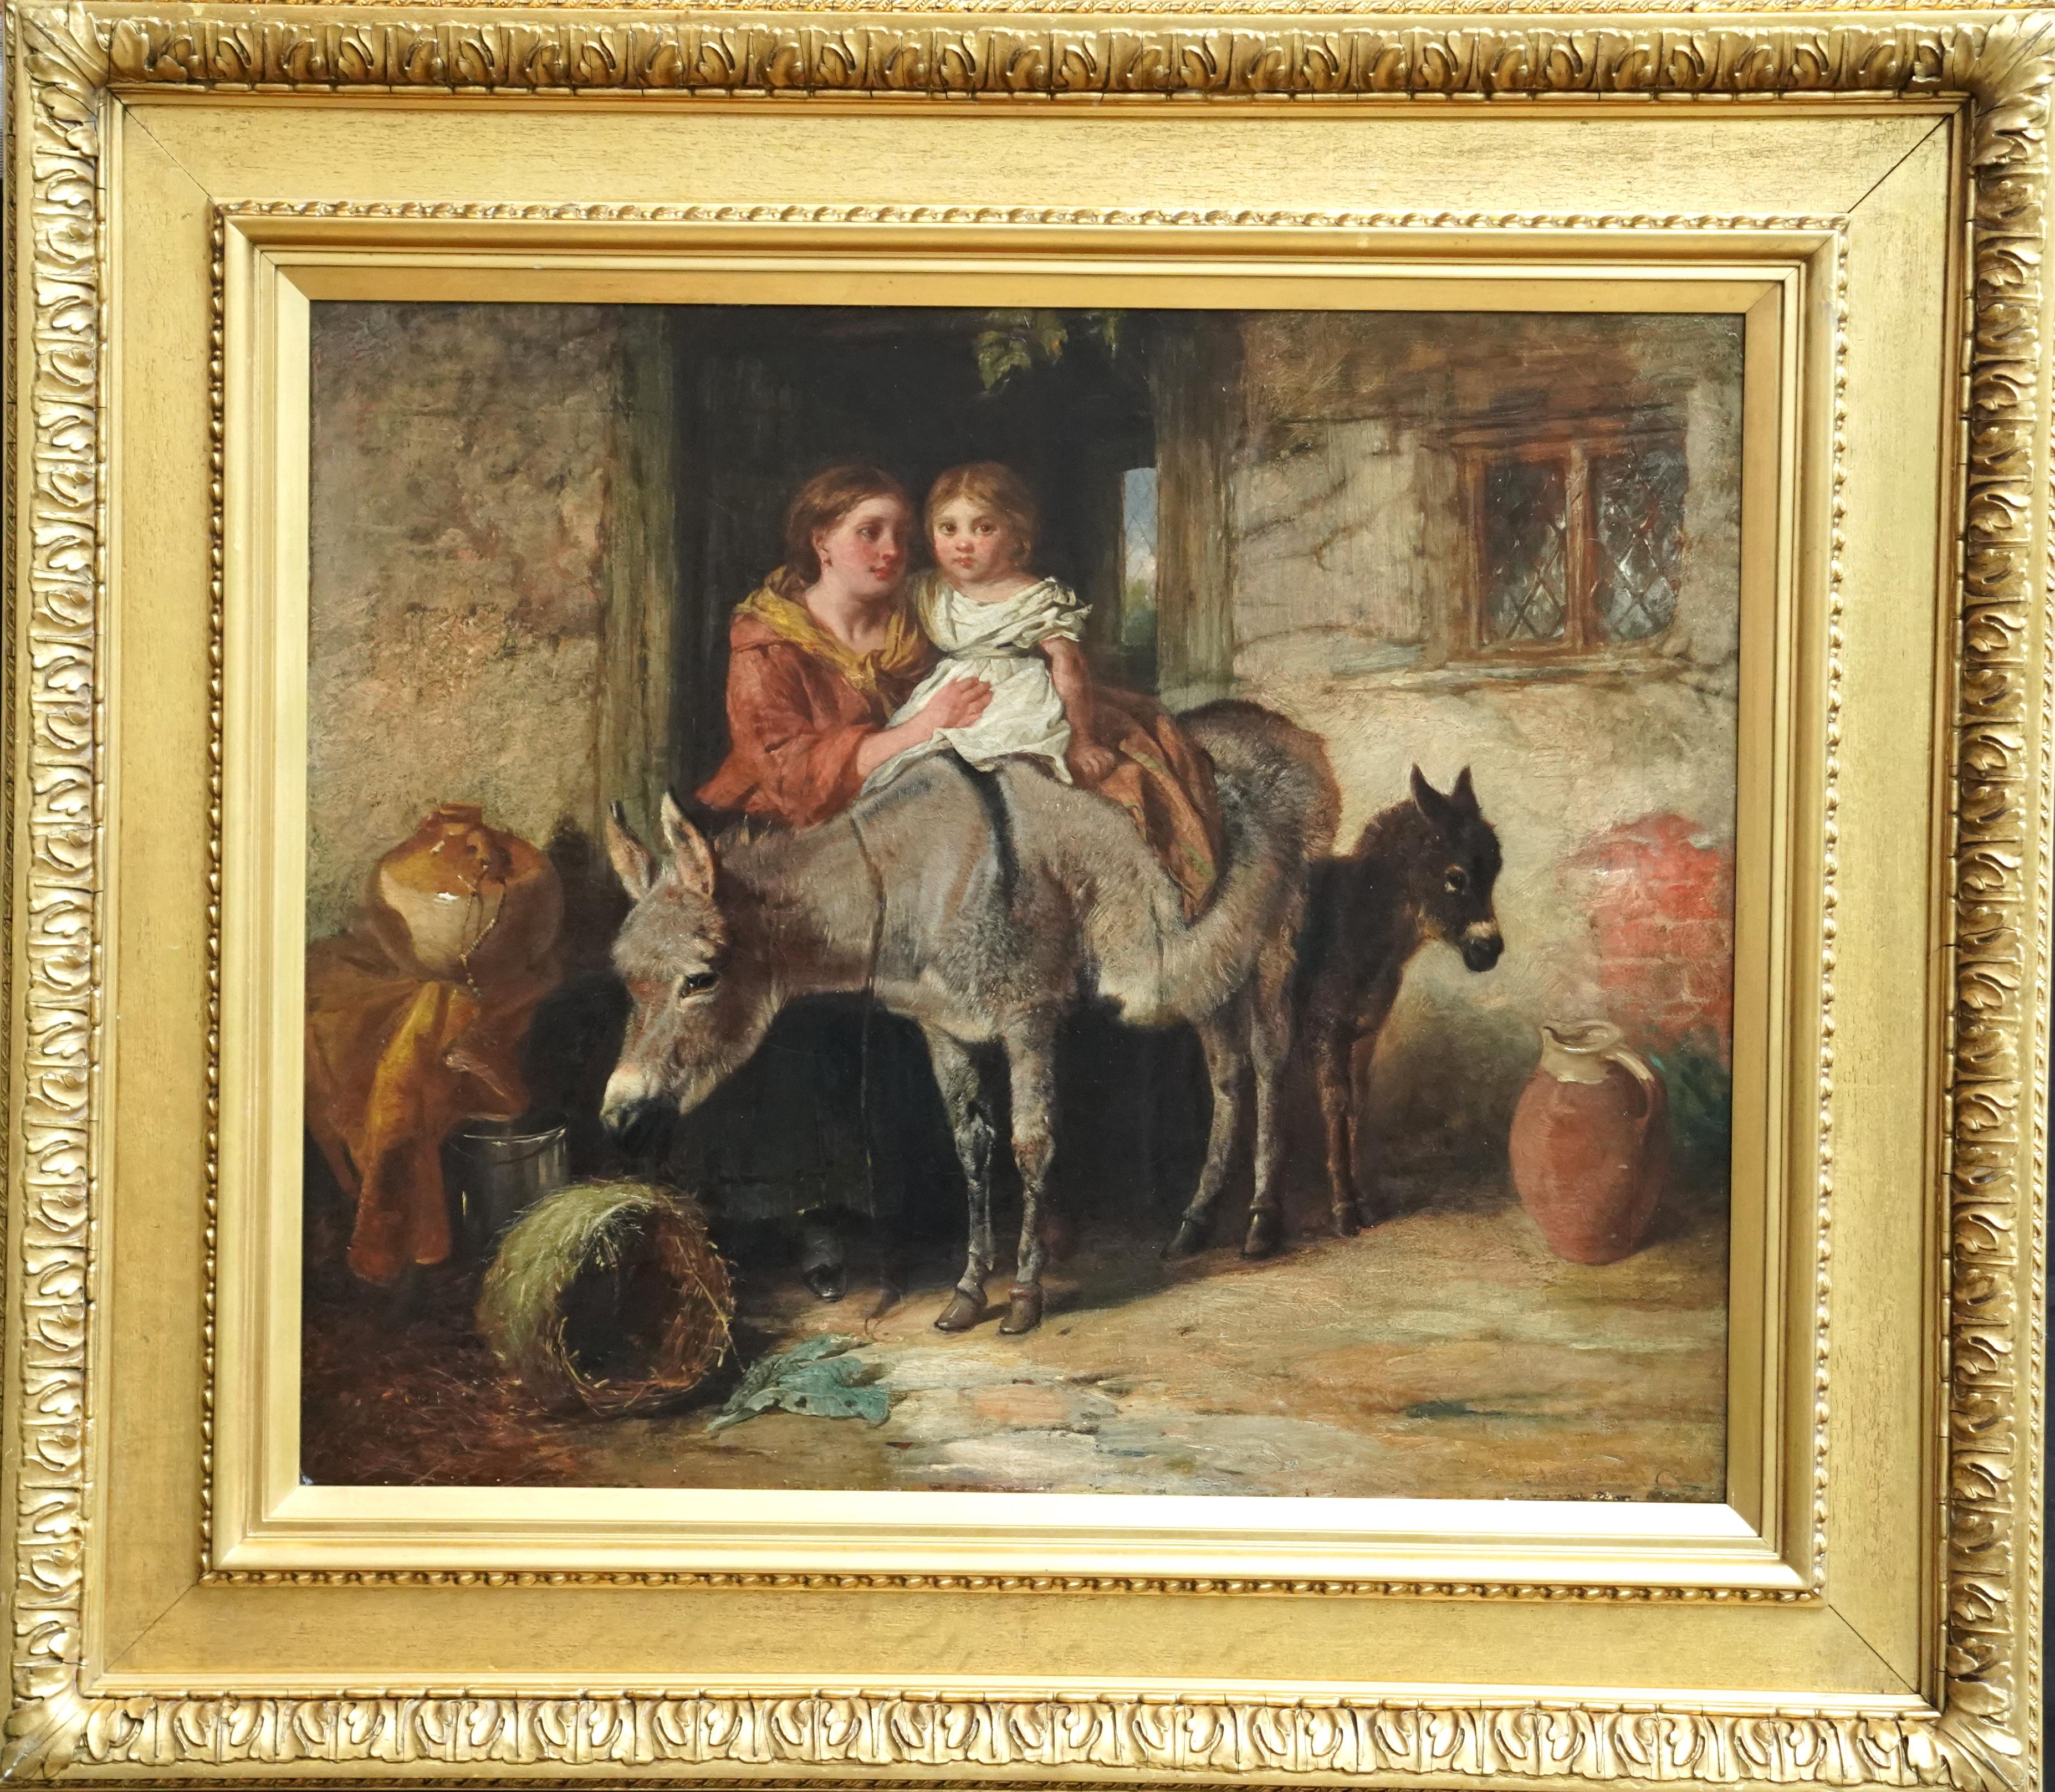 Isaac Henzell Animal Painting - Portrait of Mother, Child and Donkey - British 19th century genre oil painting